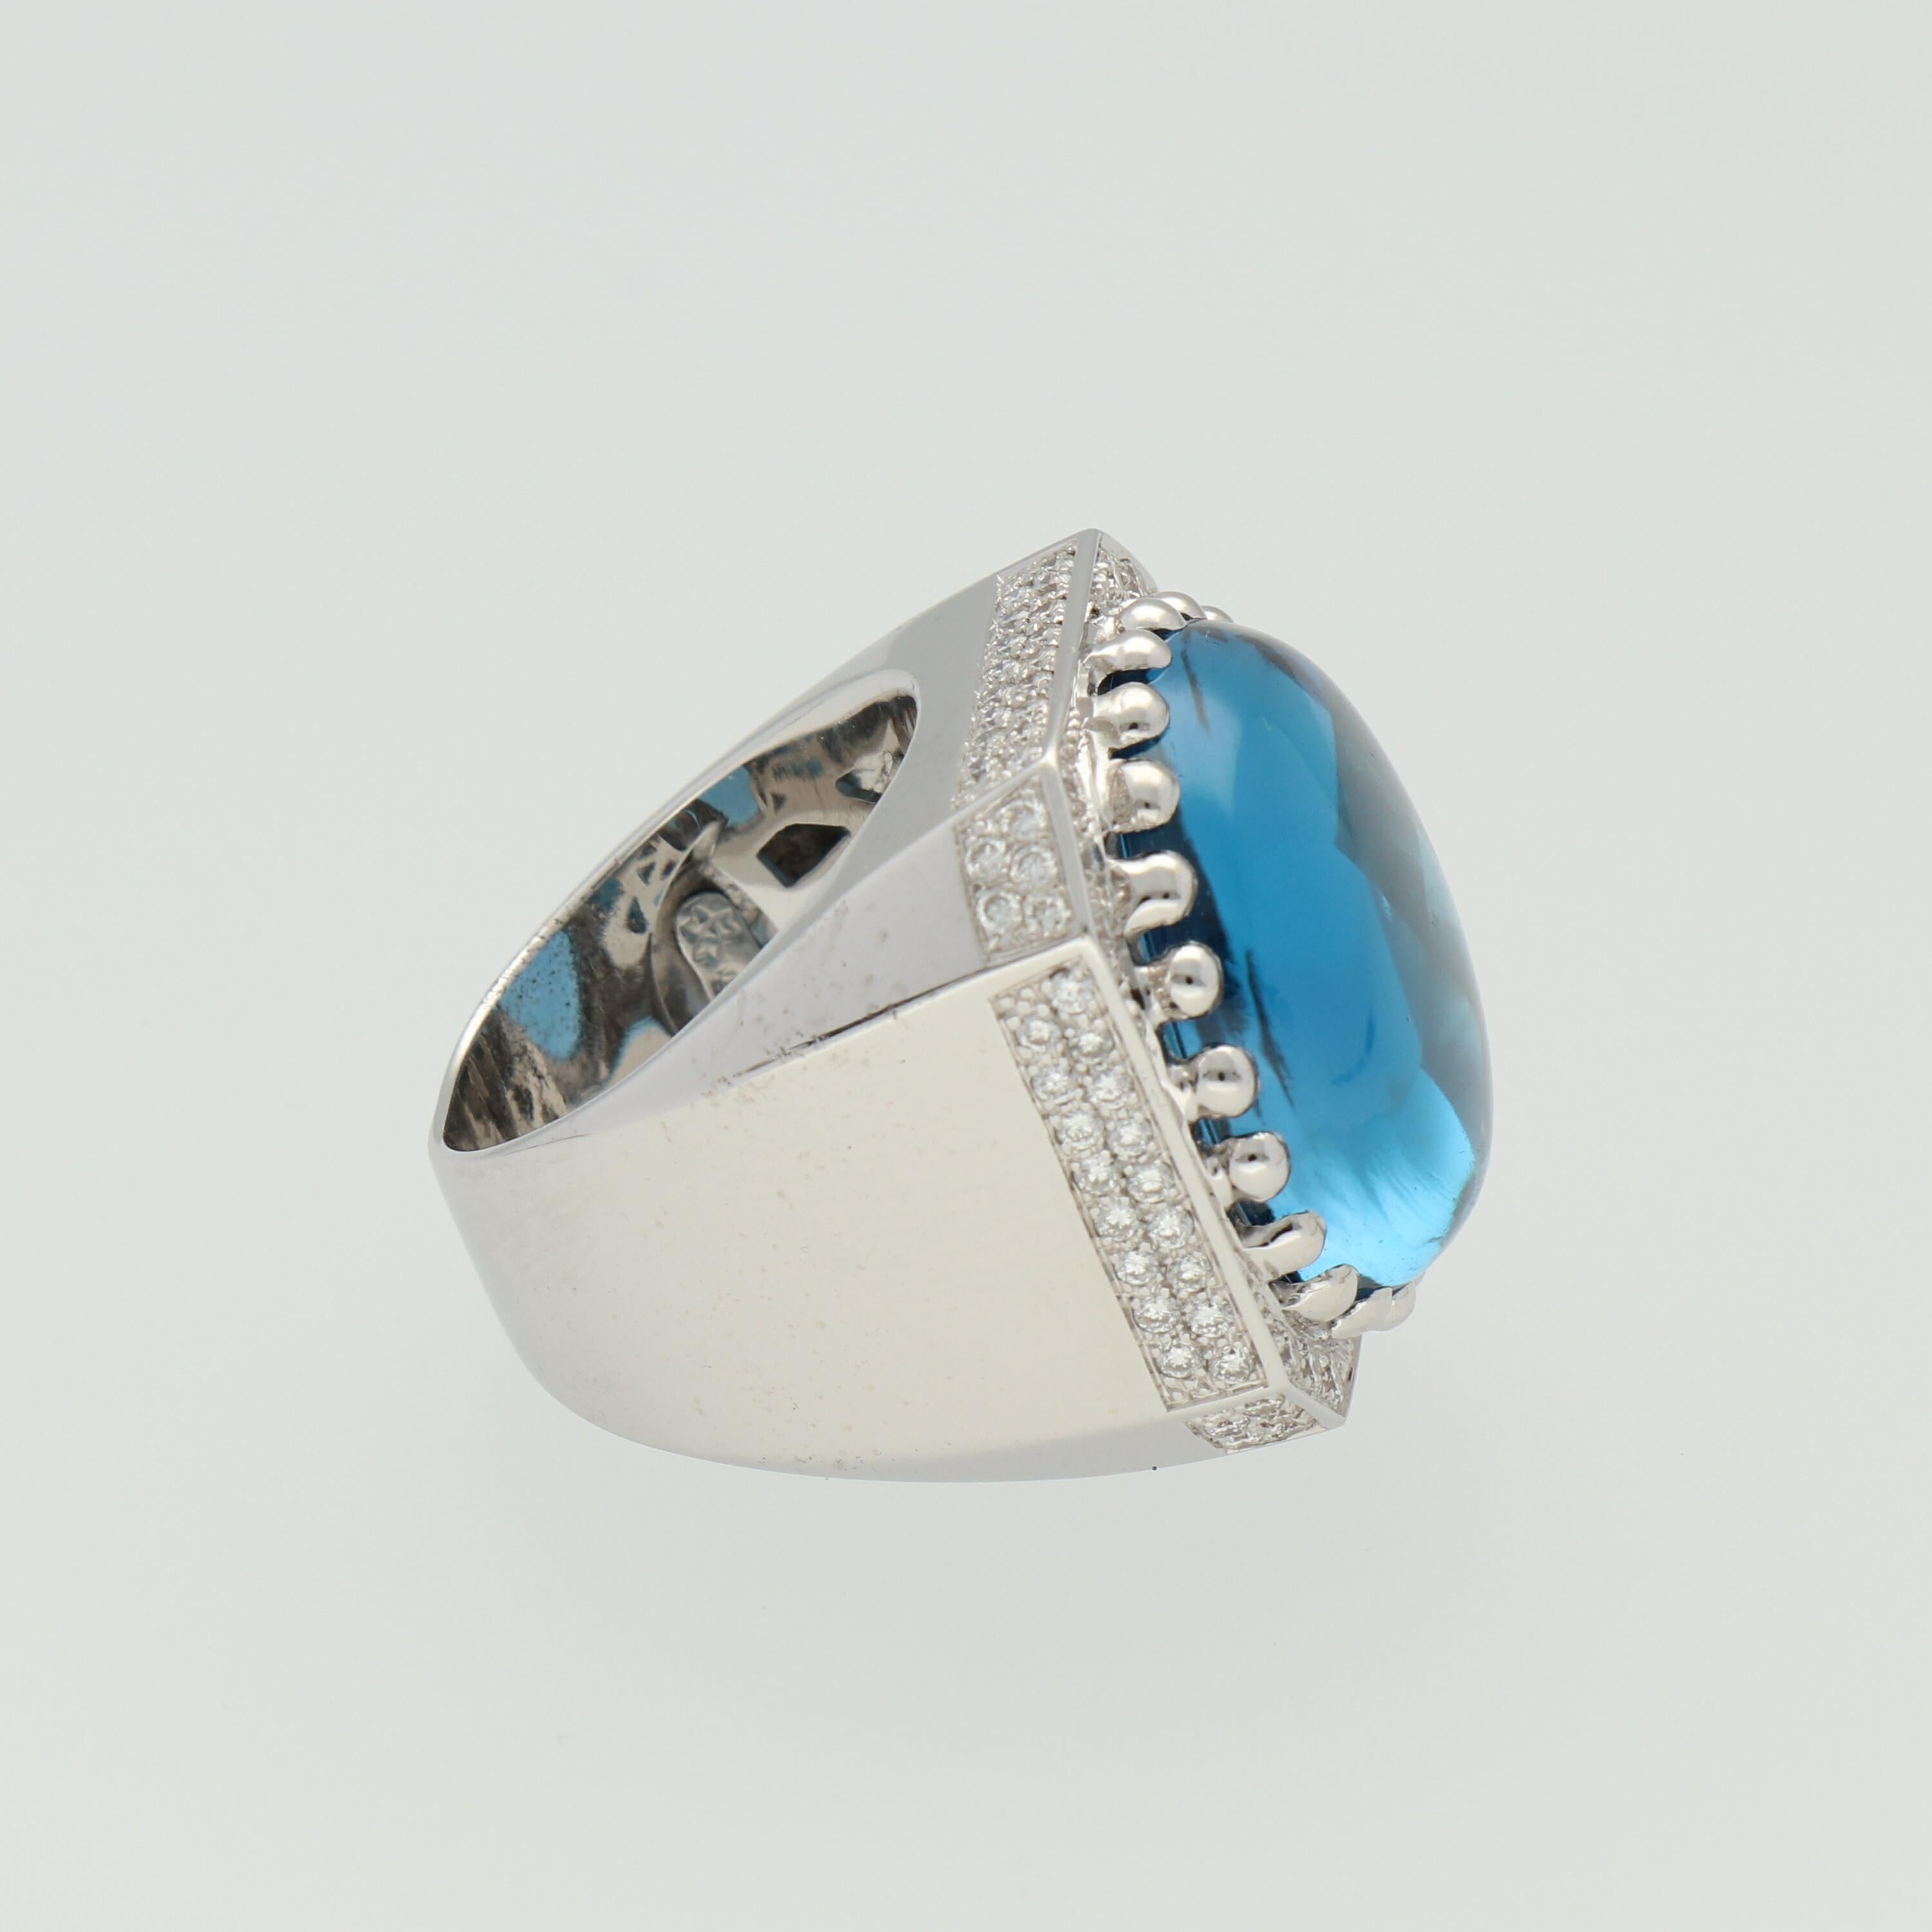 A 18 mm diameter Blue Topaz faceted back cabochon, with approximately 1.15 carat round-cut diamonds mounted in an 18K White Gold Cocktail Ring.

Size US 7 - 54.4 mm

Components:
18K white gold weigh approximately - 20 grams
1 Topaz - 18 mm diameter